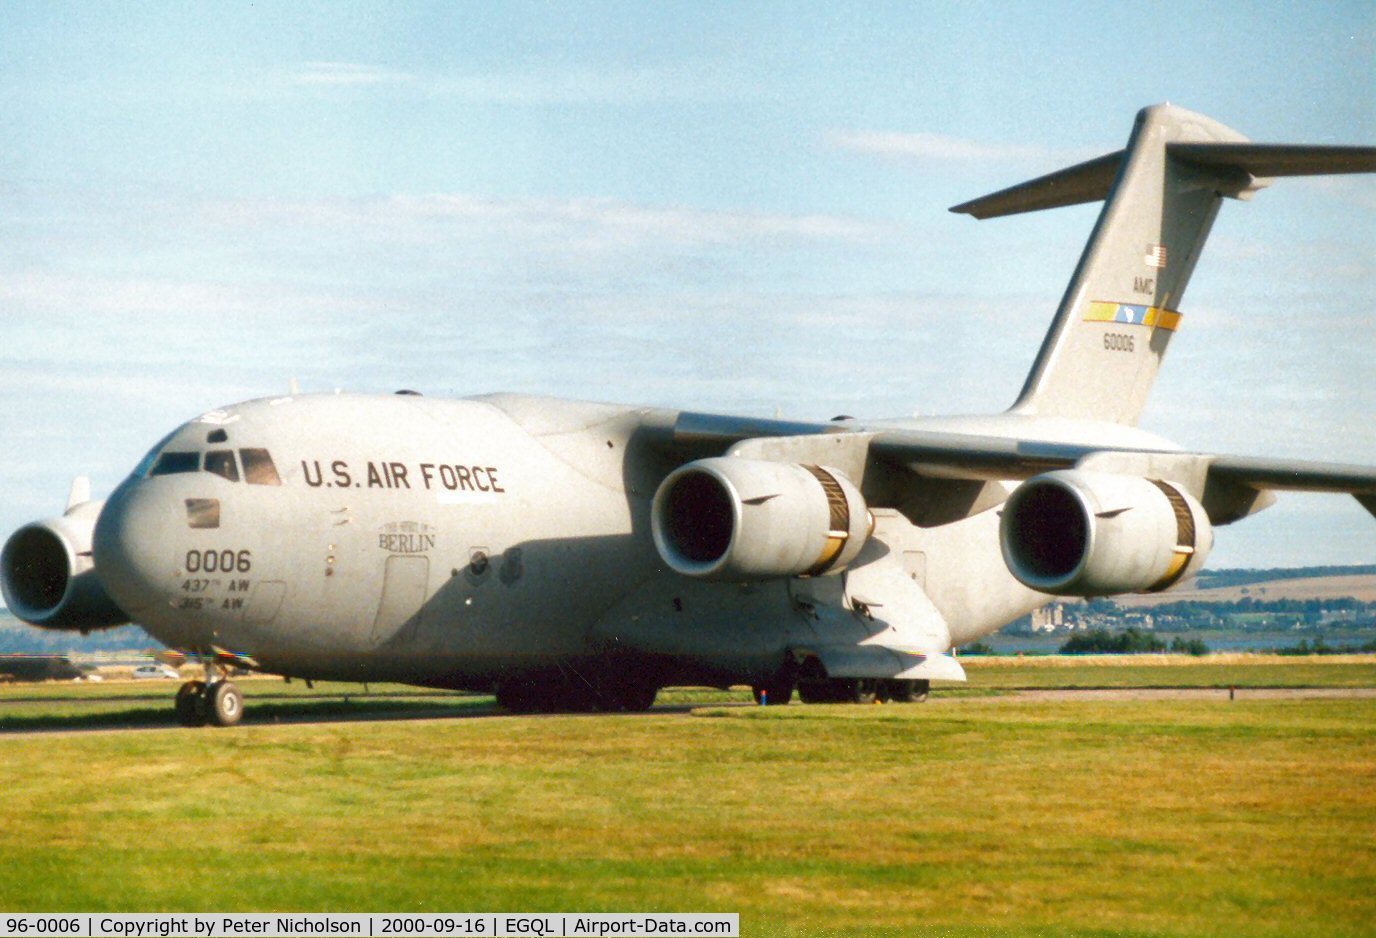 96-0006, 1996 McDonnell Douglas C-17A Globemaster III C/N P-38, C-17A Globemaster, callsign Reach 6006, named City of Berlin of 437th Airlift Wing at the 2000 Leuchars Airshow.